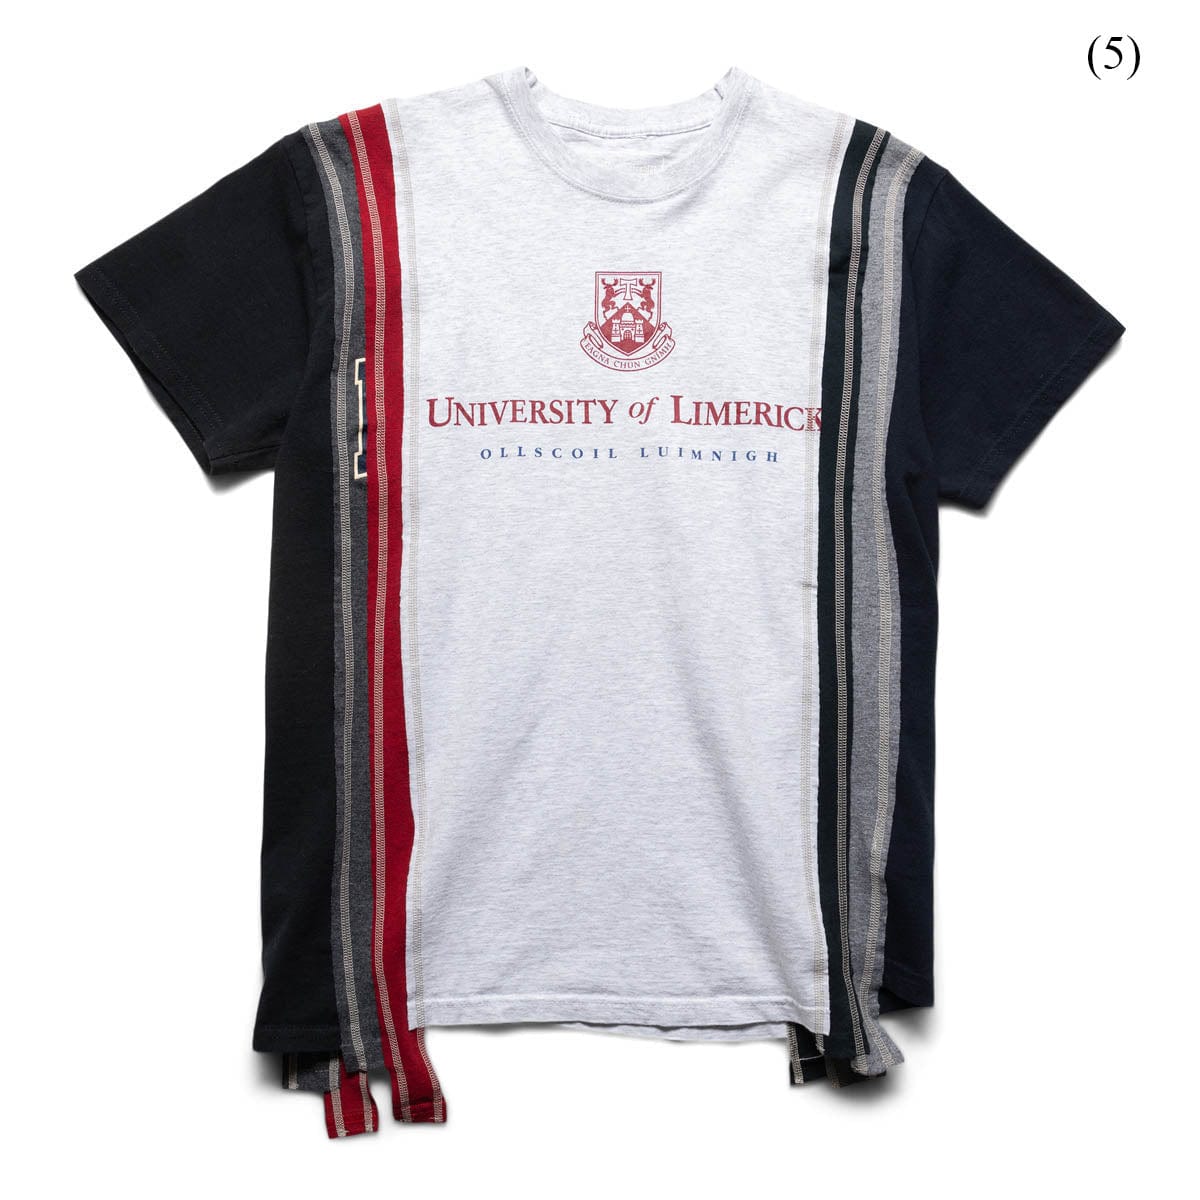 Needles 7 CUTS S/S TEE - University of Limerick COLLEGE SS22 (SMALL/MULTIPLE STYLES)